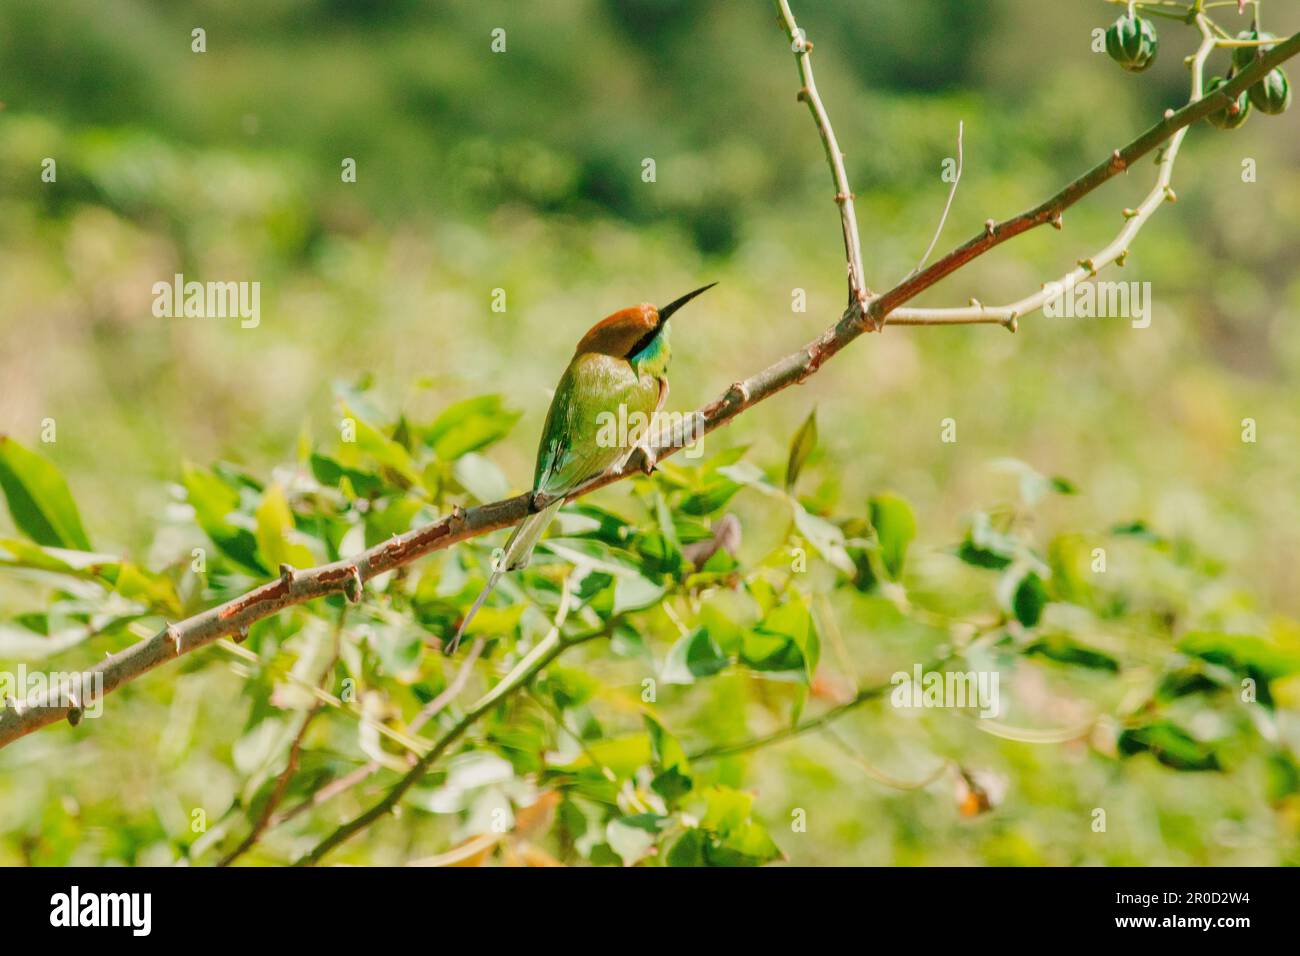 Chestnut-headed Bee-eater orange-headed with red eyes. It has reddish-orange hair covering its head and shoulders. Often perched on the open branches Stock Photo